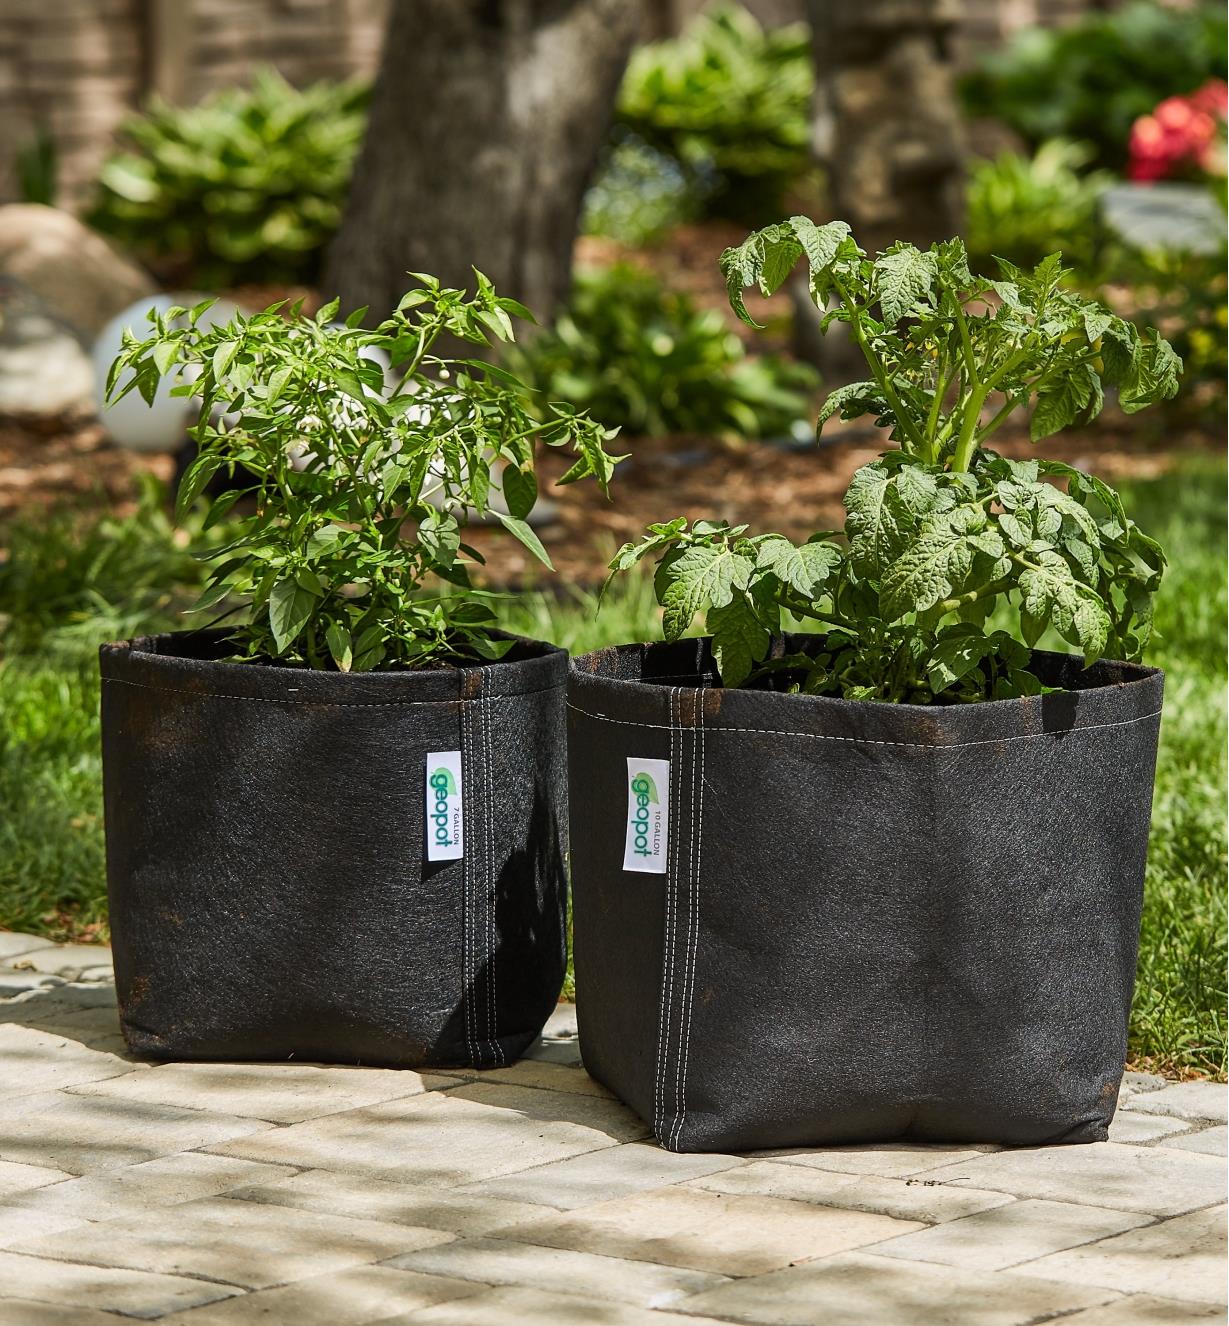 Two unhandled fabric pots with plants growing from them sitting on an outdoor patio